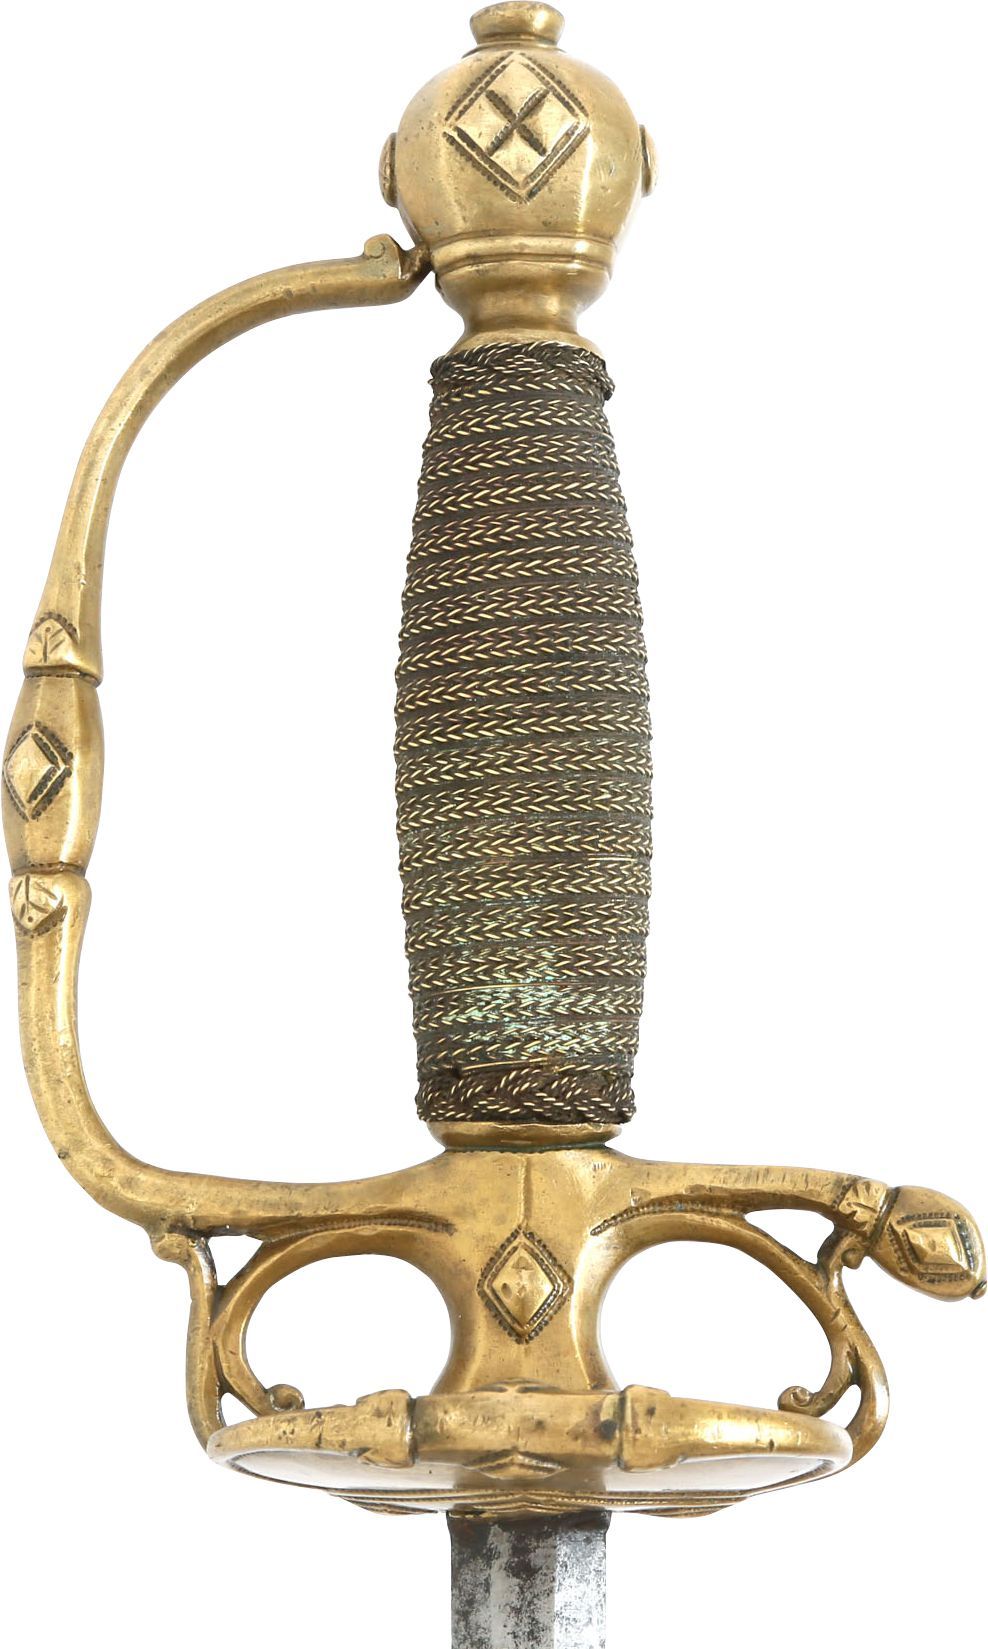 MILITARY OFFICER’S SMALLSWORD C.1700, PROBABLY SAXON - Fagan Arms